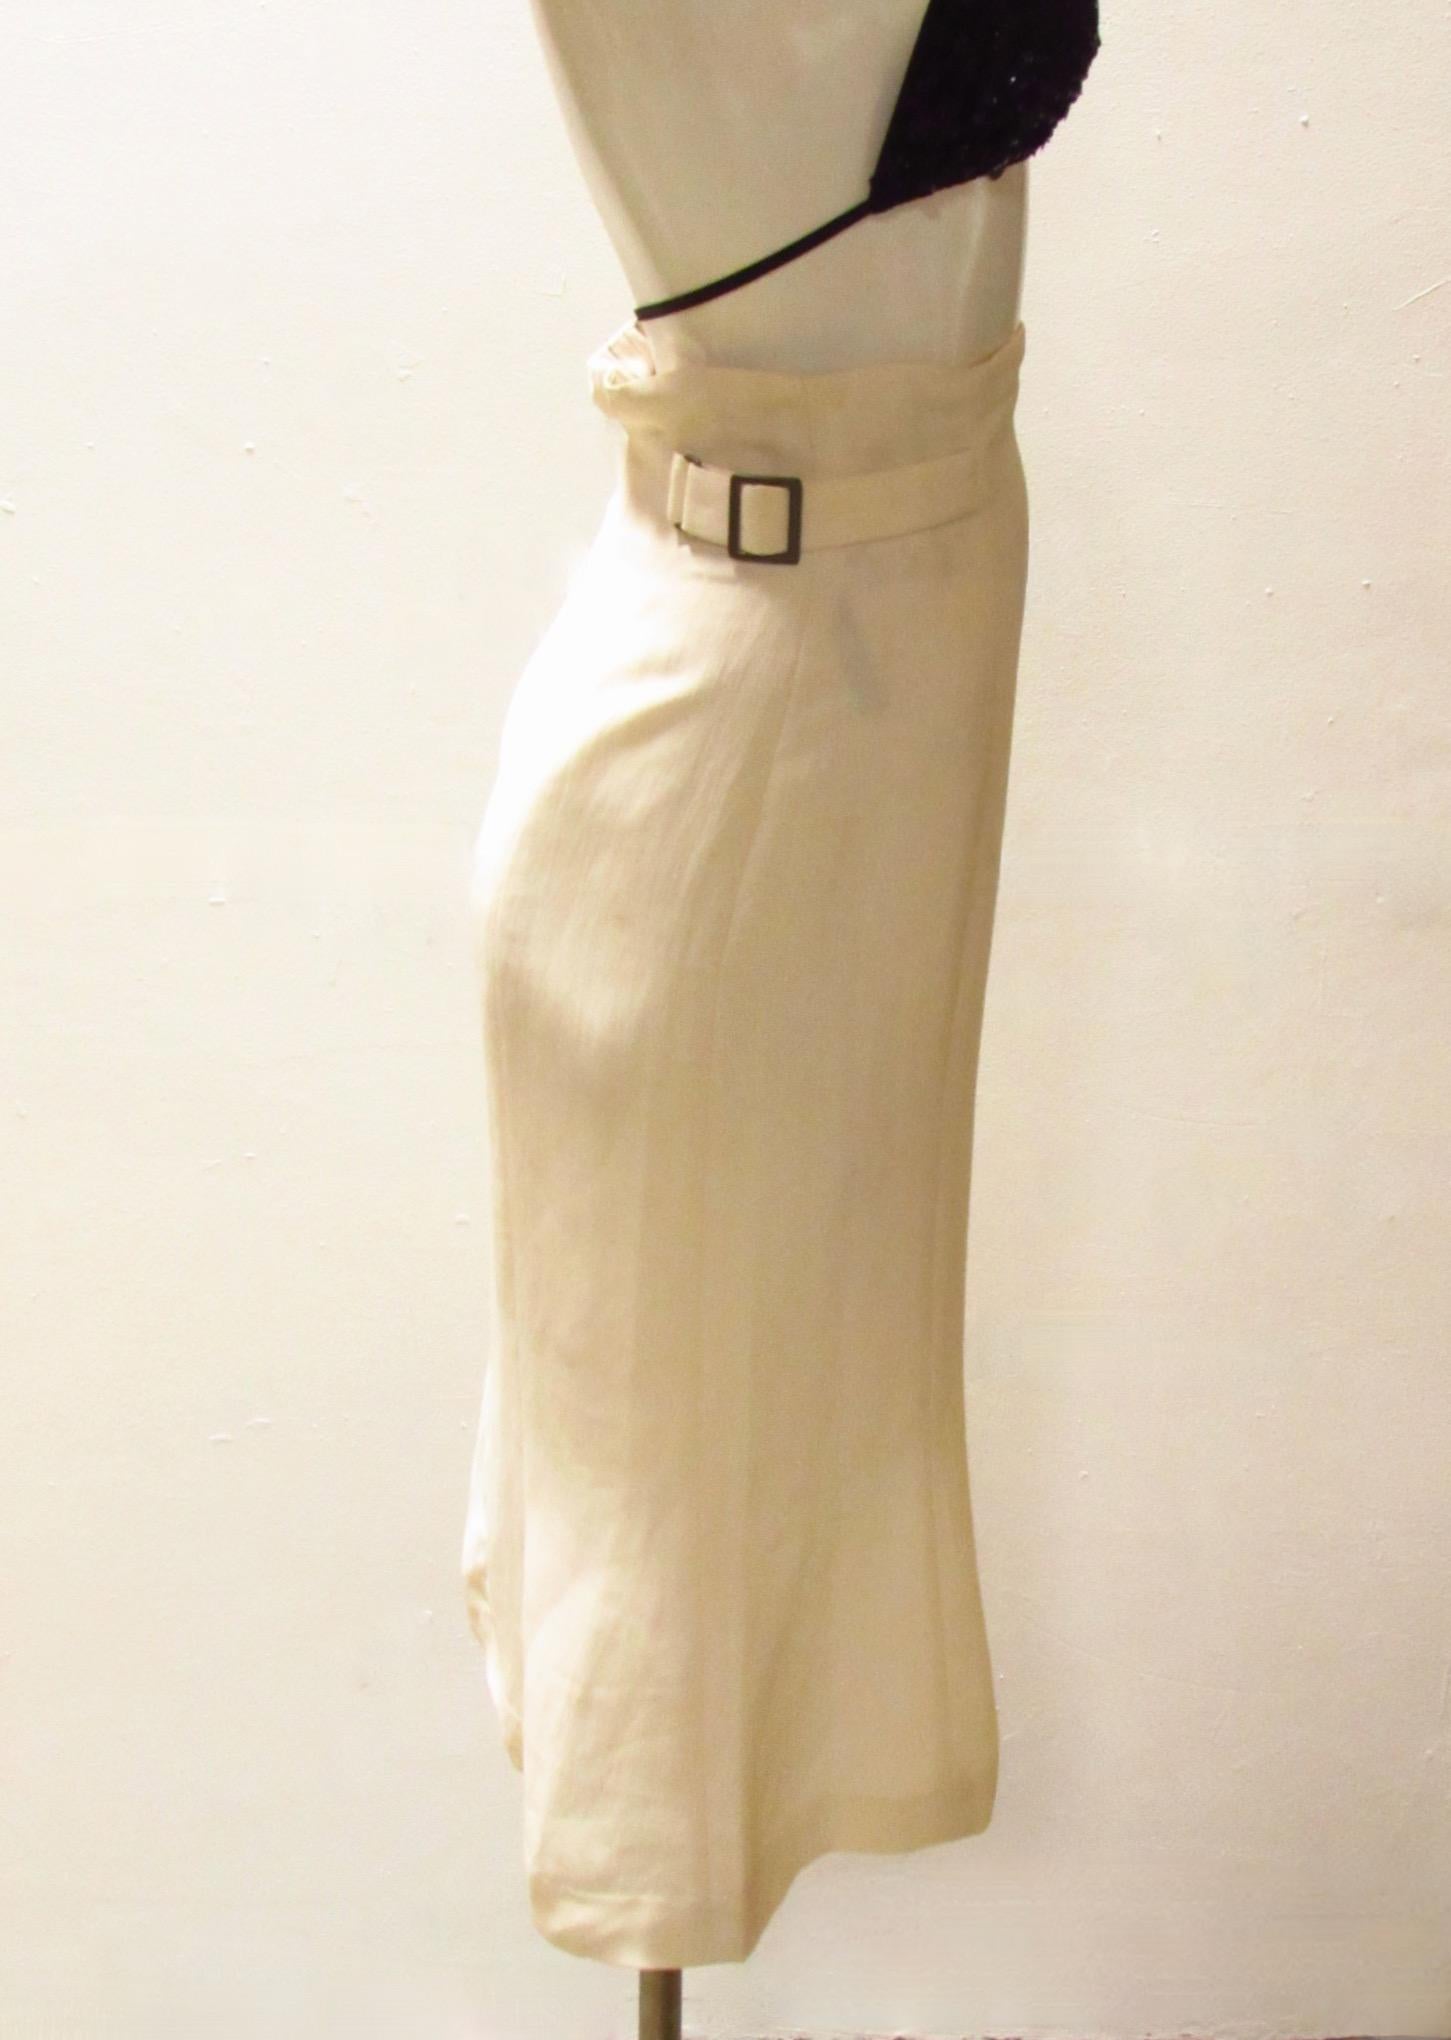 Matsuda High Waisted Skirt In New Condition For Sale In Laguna Beach, CA